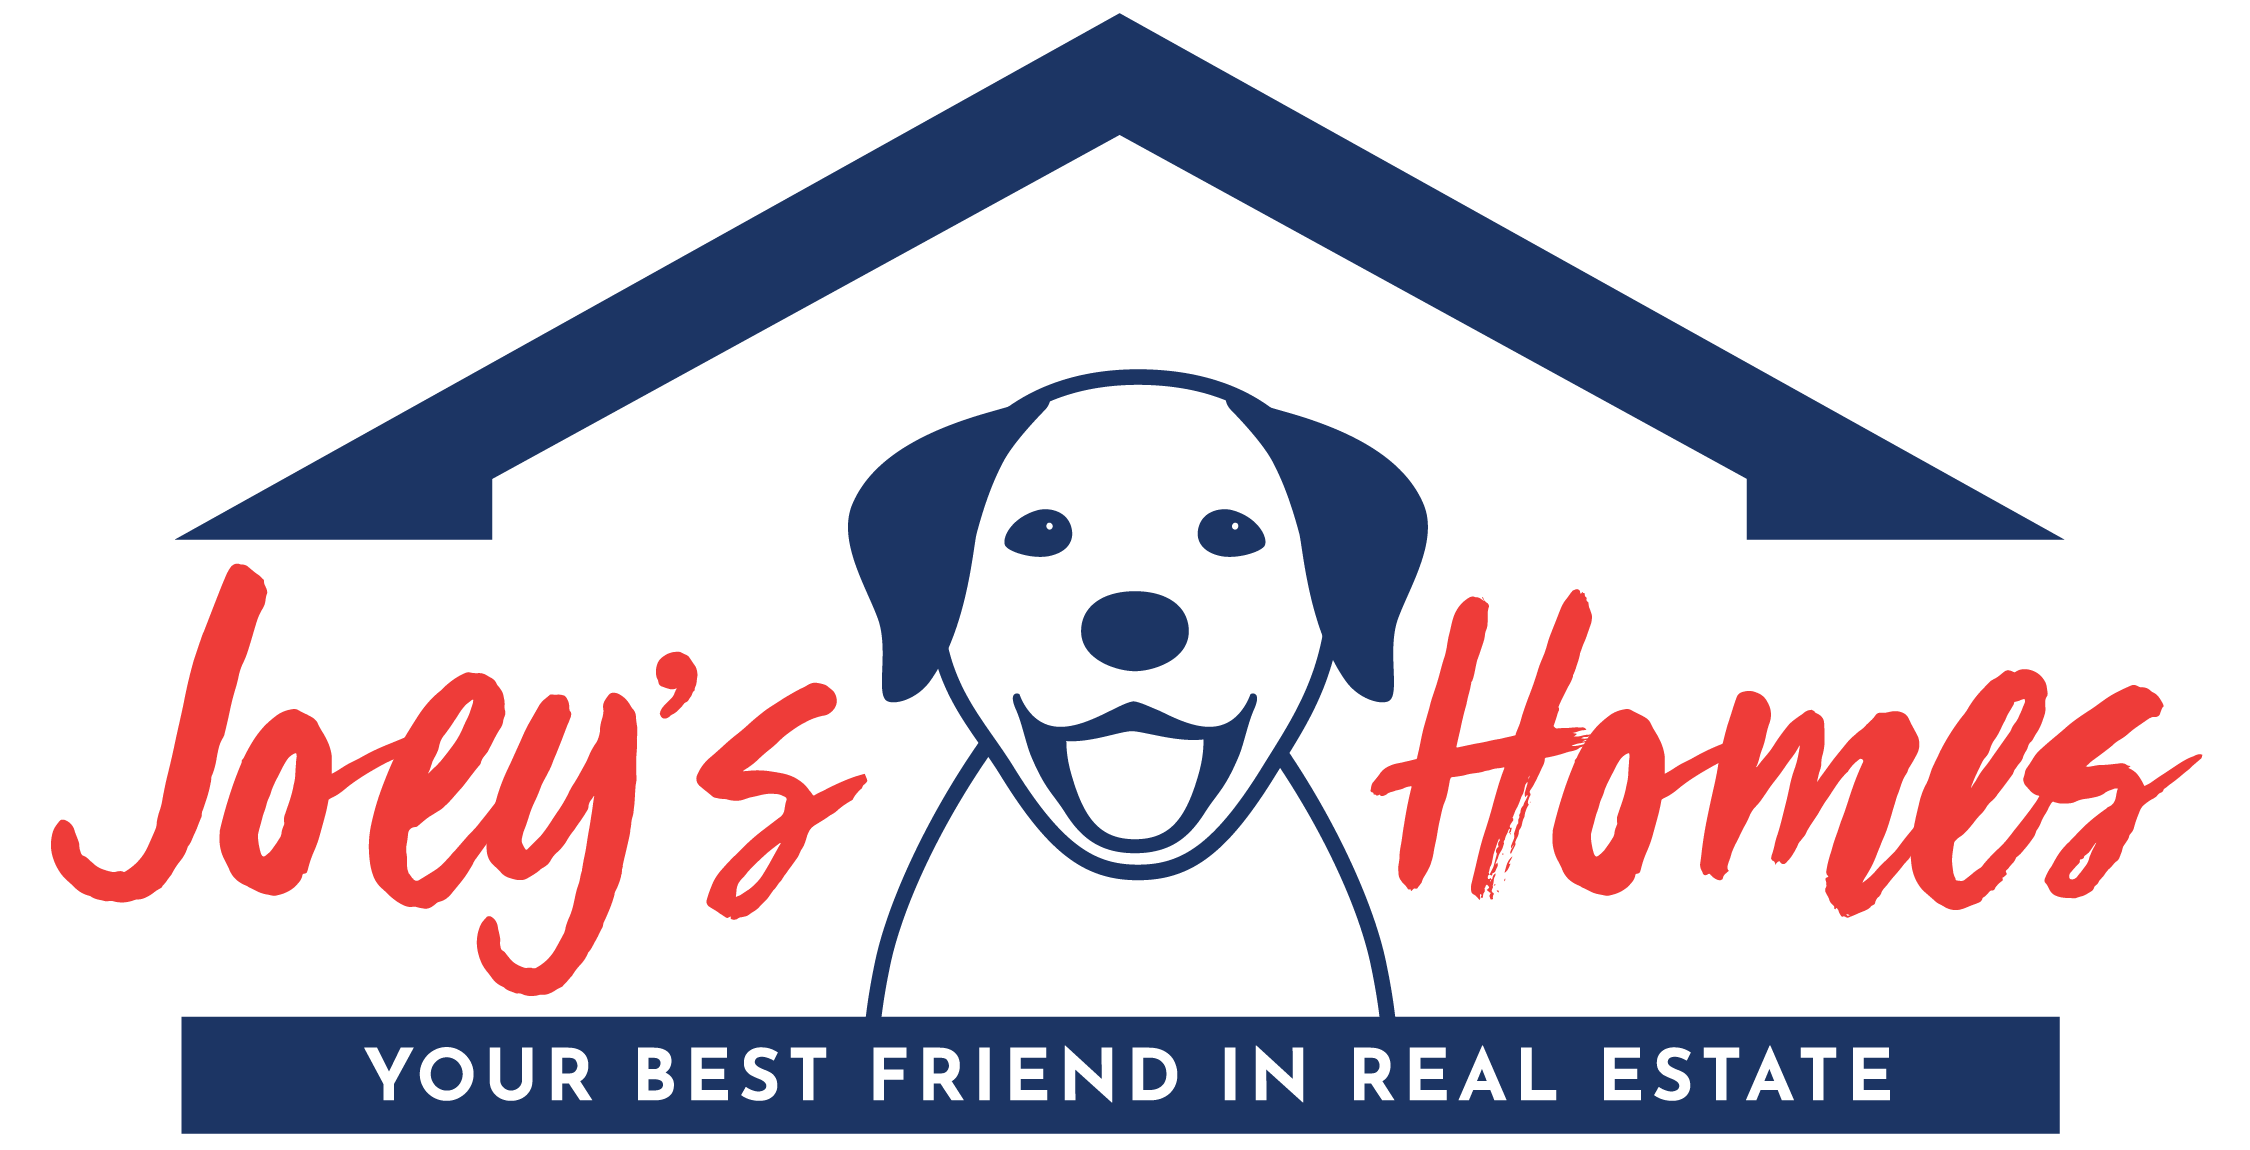 Joey's Homes | Your Best Friend in Real Estate